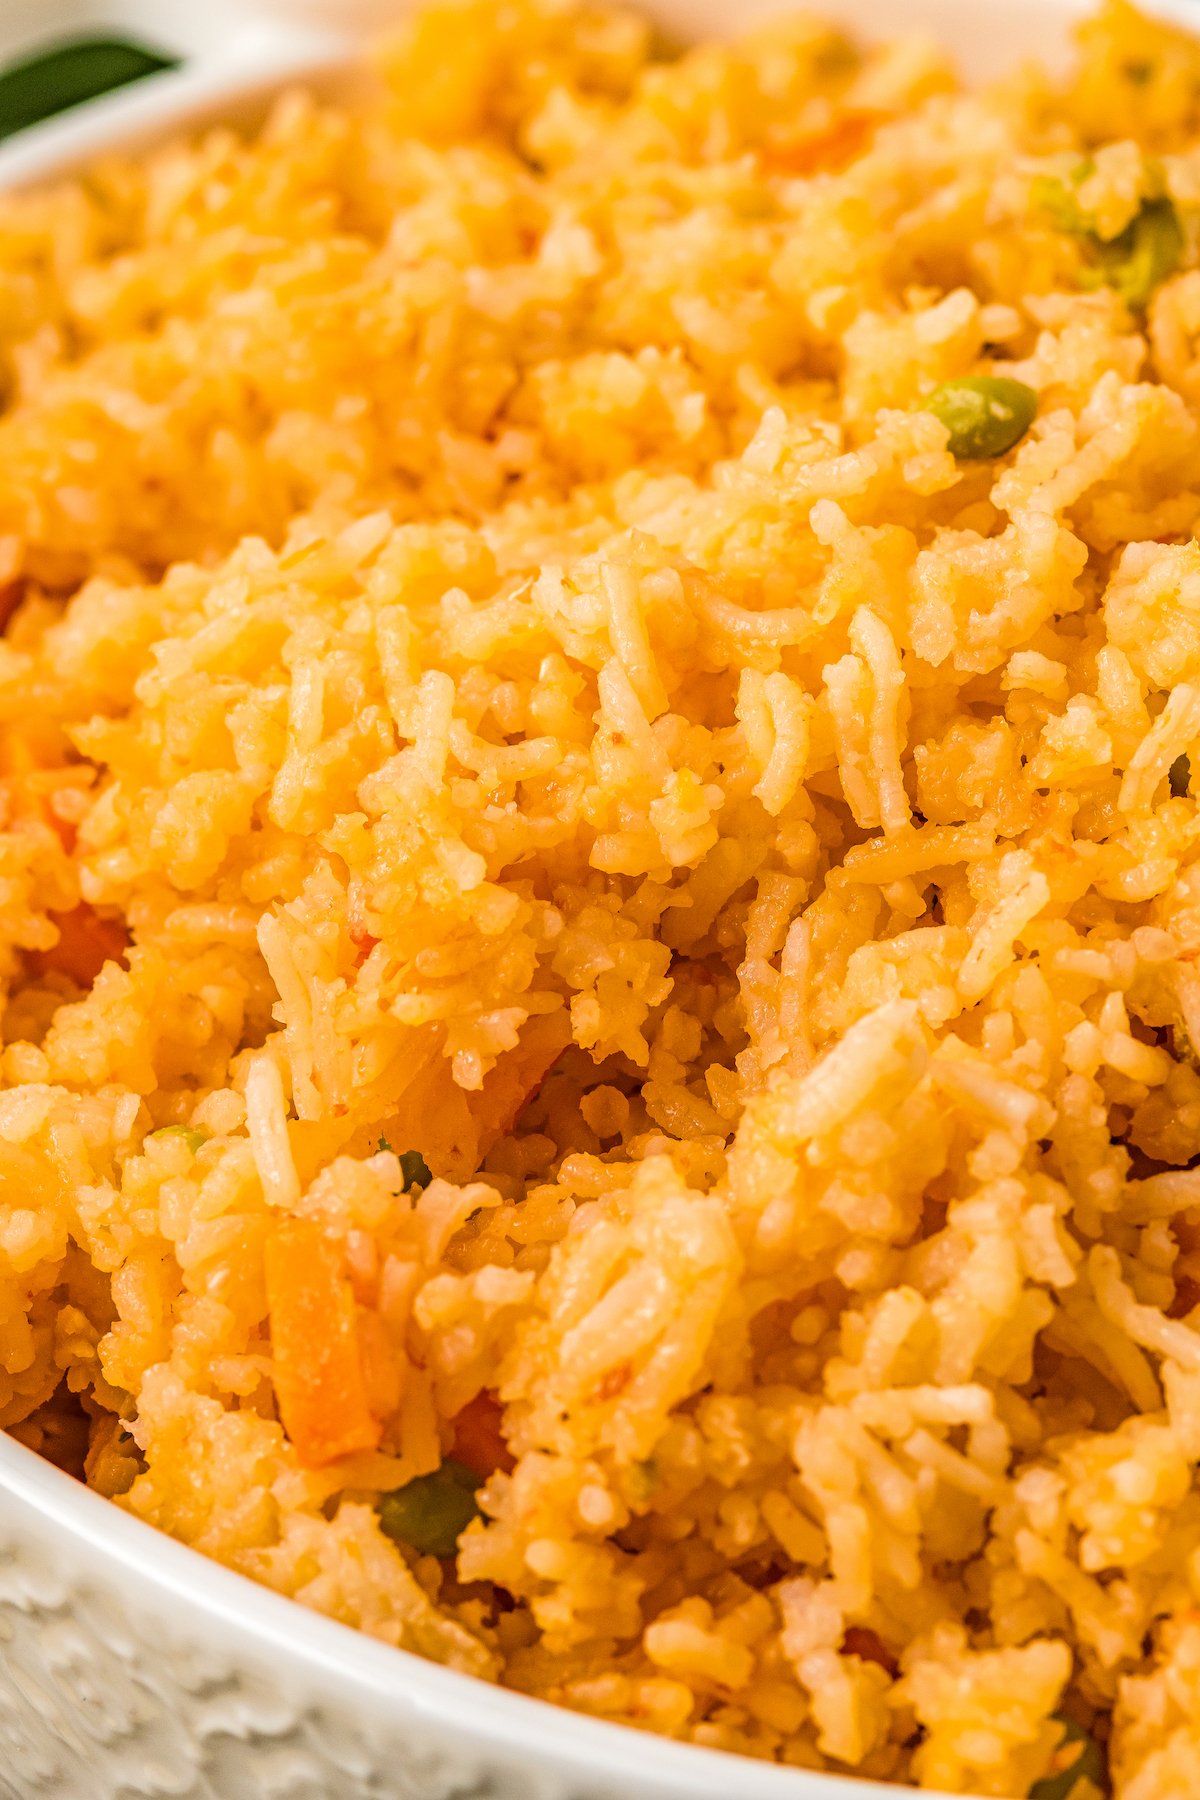 Close-up shot of seasoned, Mexican-style rice, showing the fluffy texture.